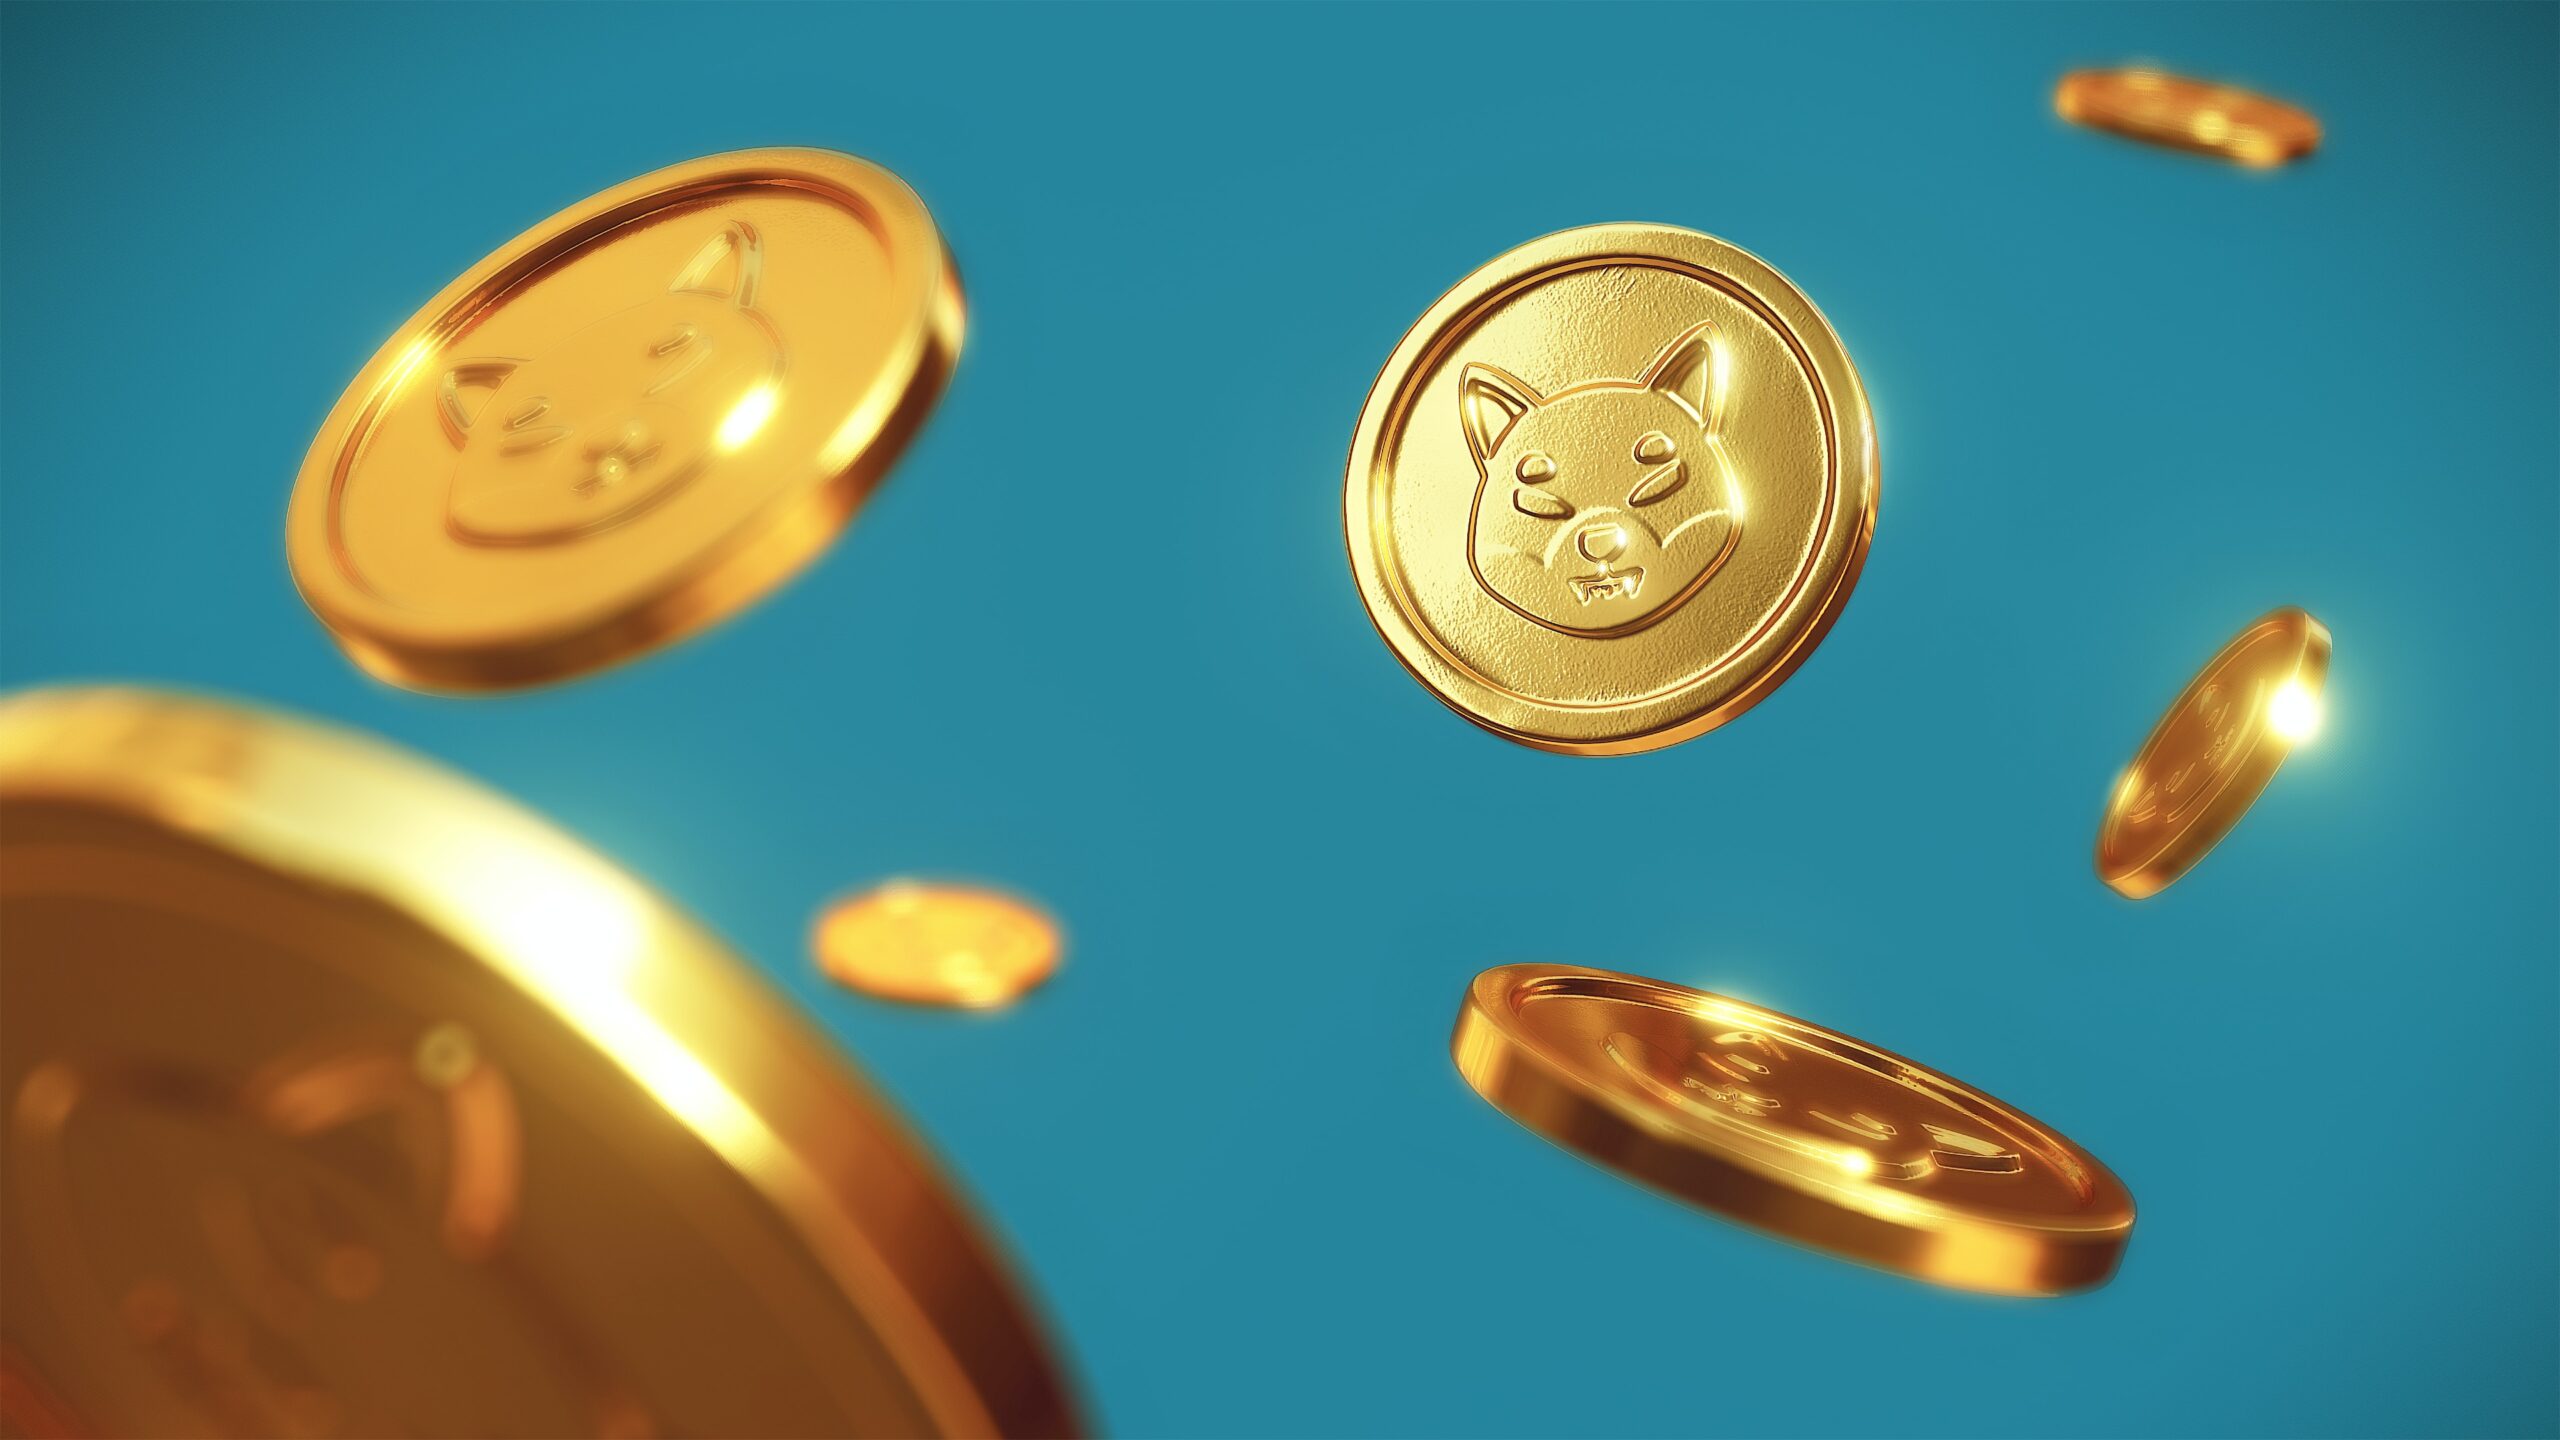 Shiba Inu’s Price Struggles Amidst Market Turbulence, While Bitcoin’s Resilience Takes Center Stage